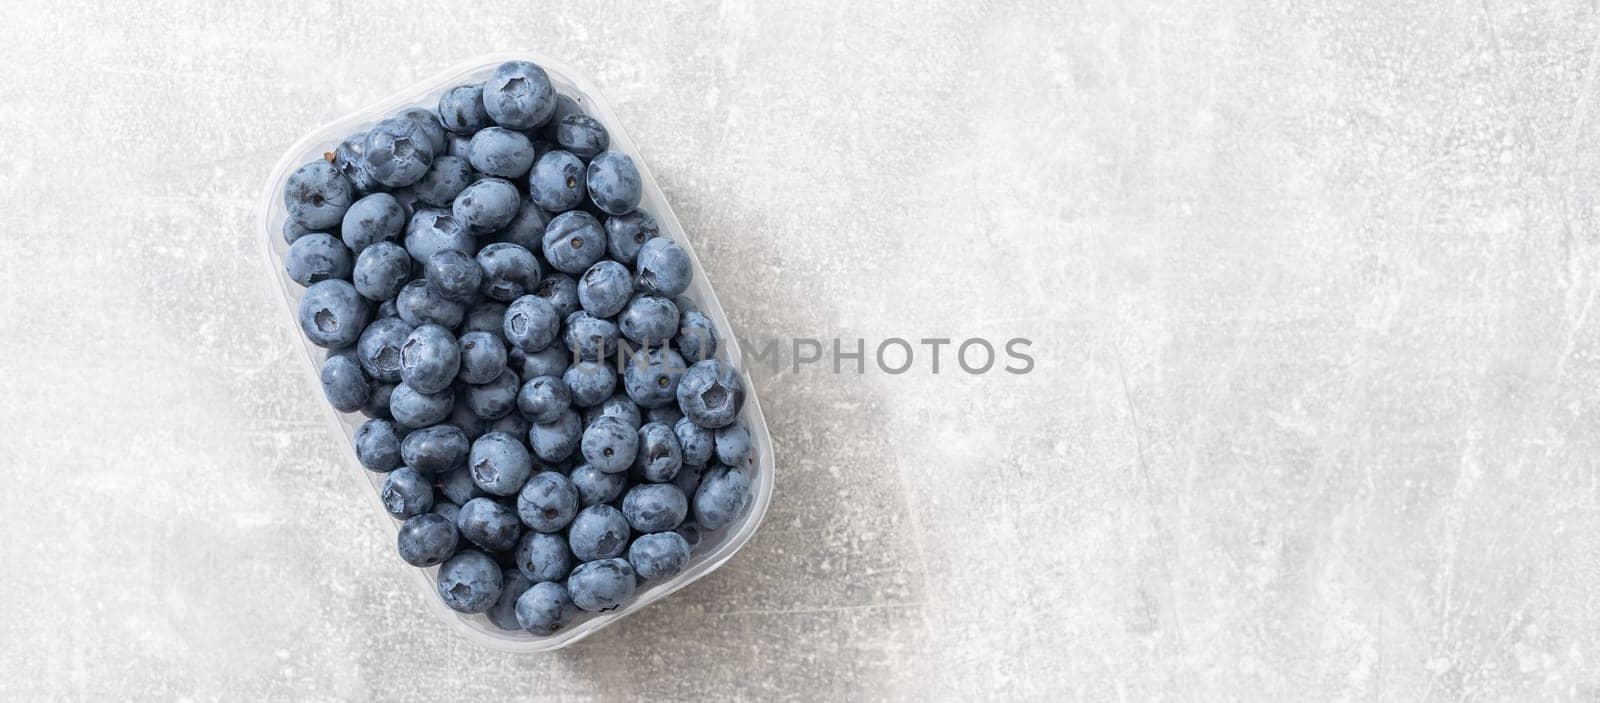 Fresh blueberries in a container on a white background